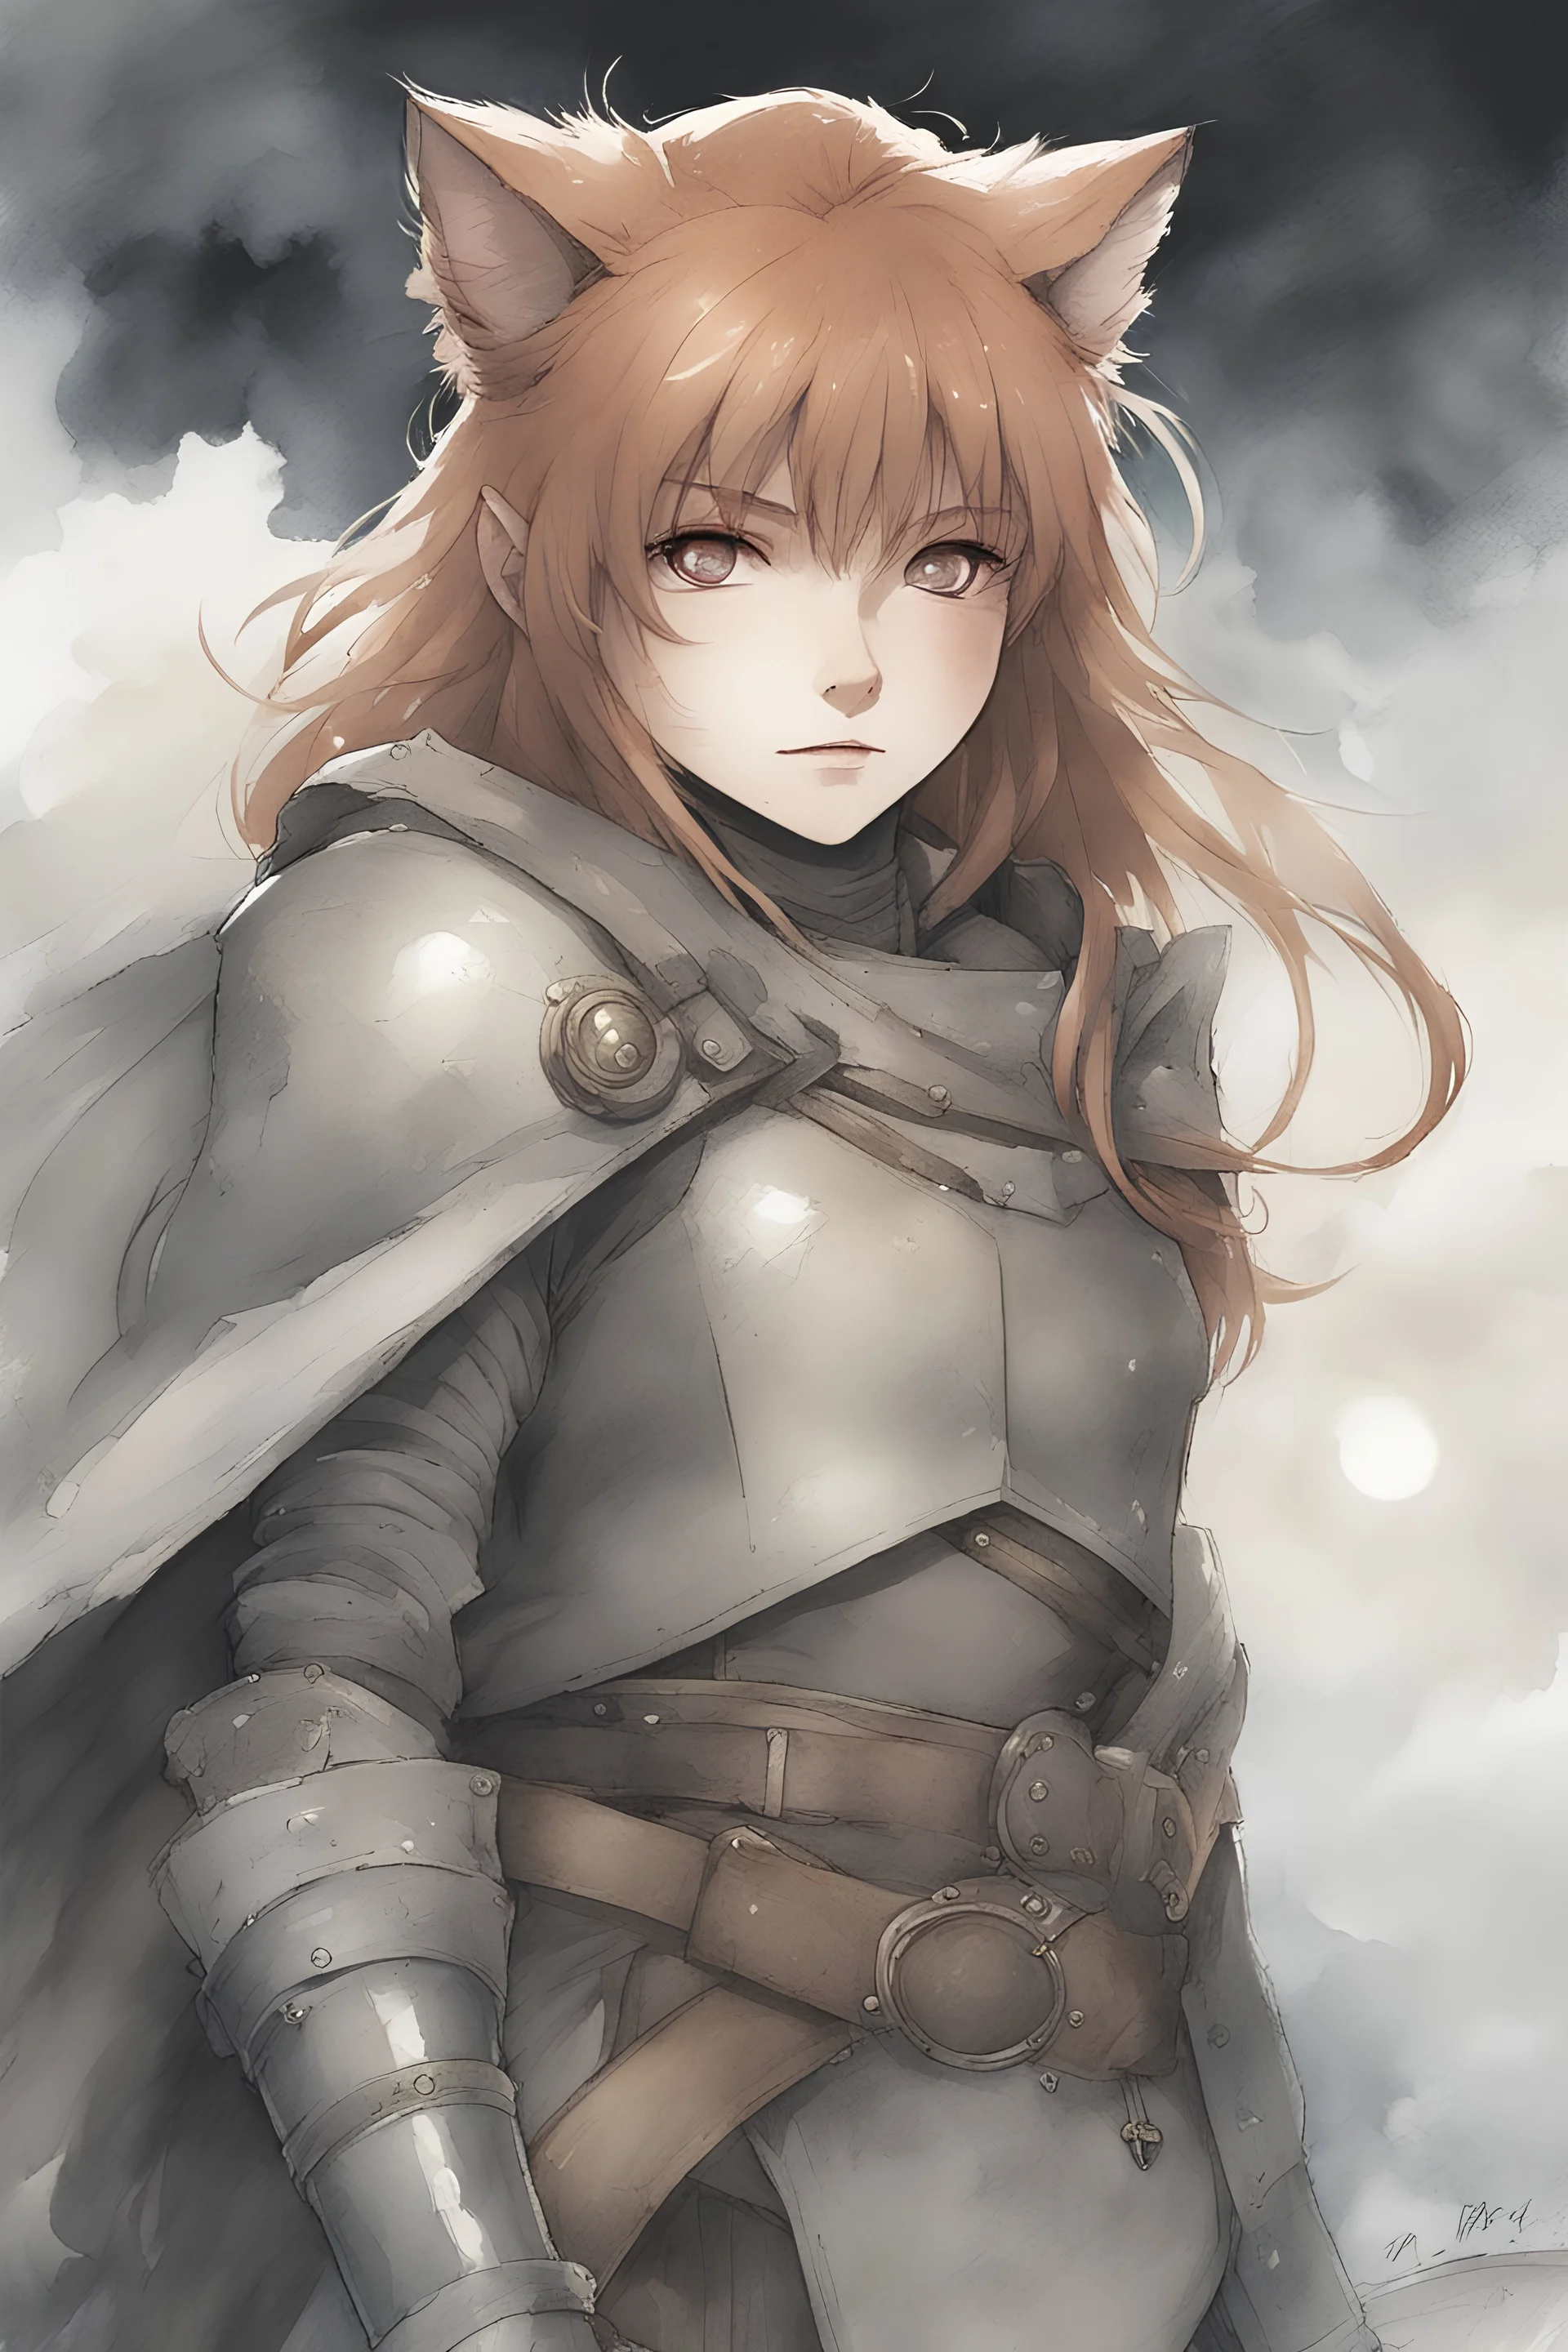 Raphtalia from rising of the Shield Hero. A soft-focus image of the silver moonrise casting a cool glow, create in inkwash and watercolor, in the comic book art style of Mike Mignola, Bill Sienkiewicz and Jean Giraud Moebius, highly detailed, gritty textures,